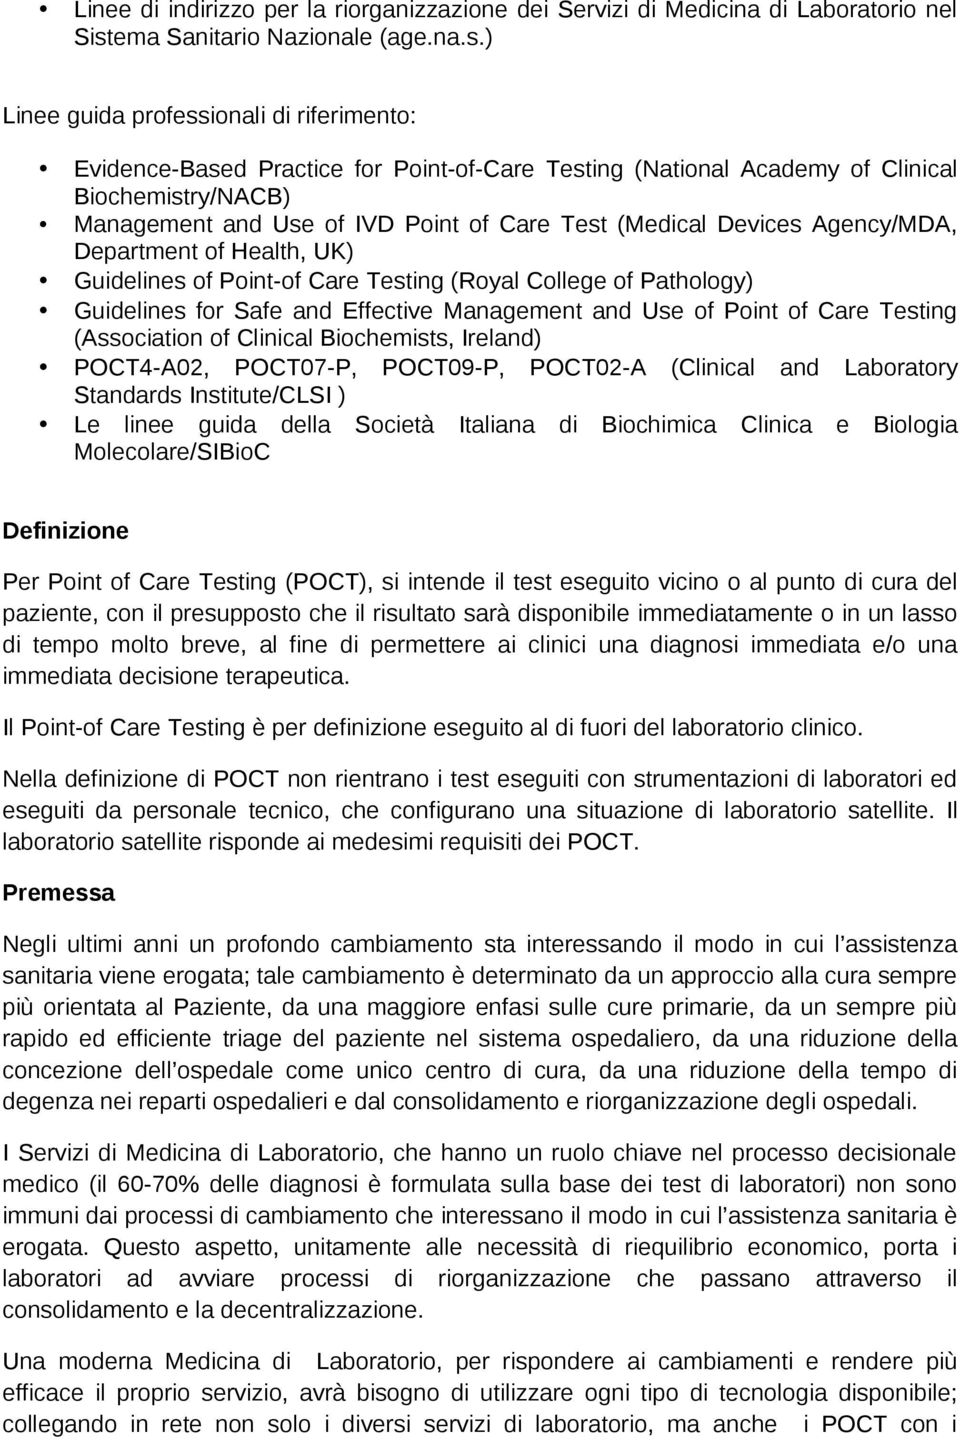 ) Linee guida professionali di riferimento: Evidence-Based Practice for Point-of-Care Testing (National Academy of Clinical Biochemistry/NACB) Management and Use of IVD Point of Care Test (Medical